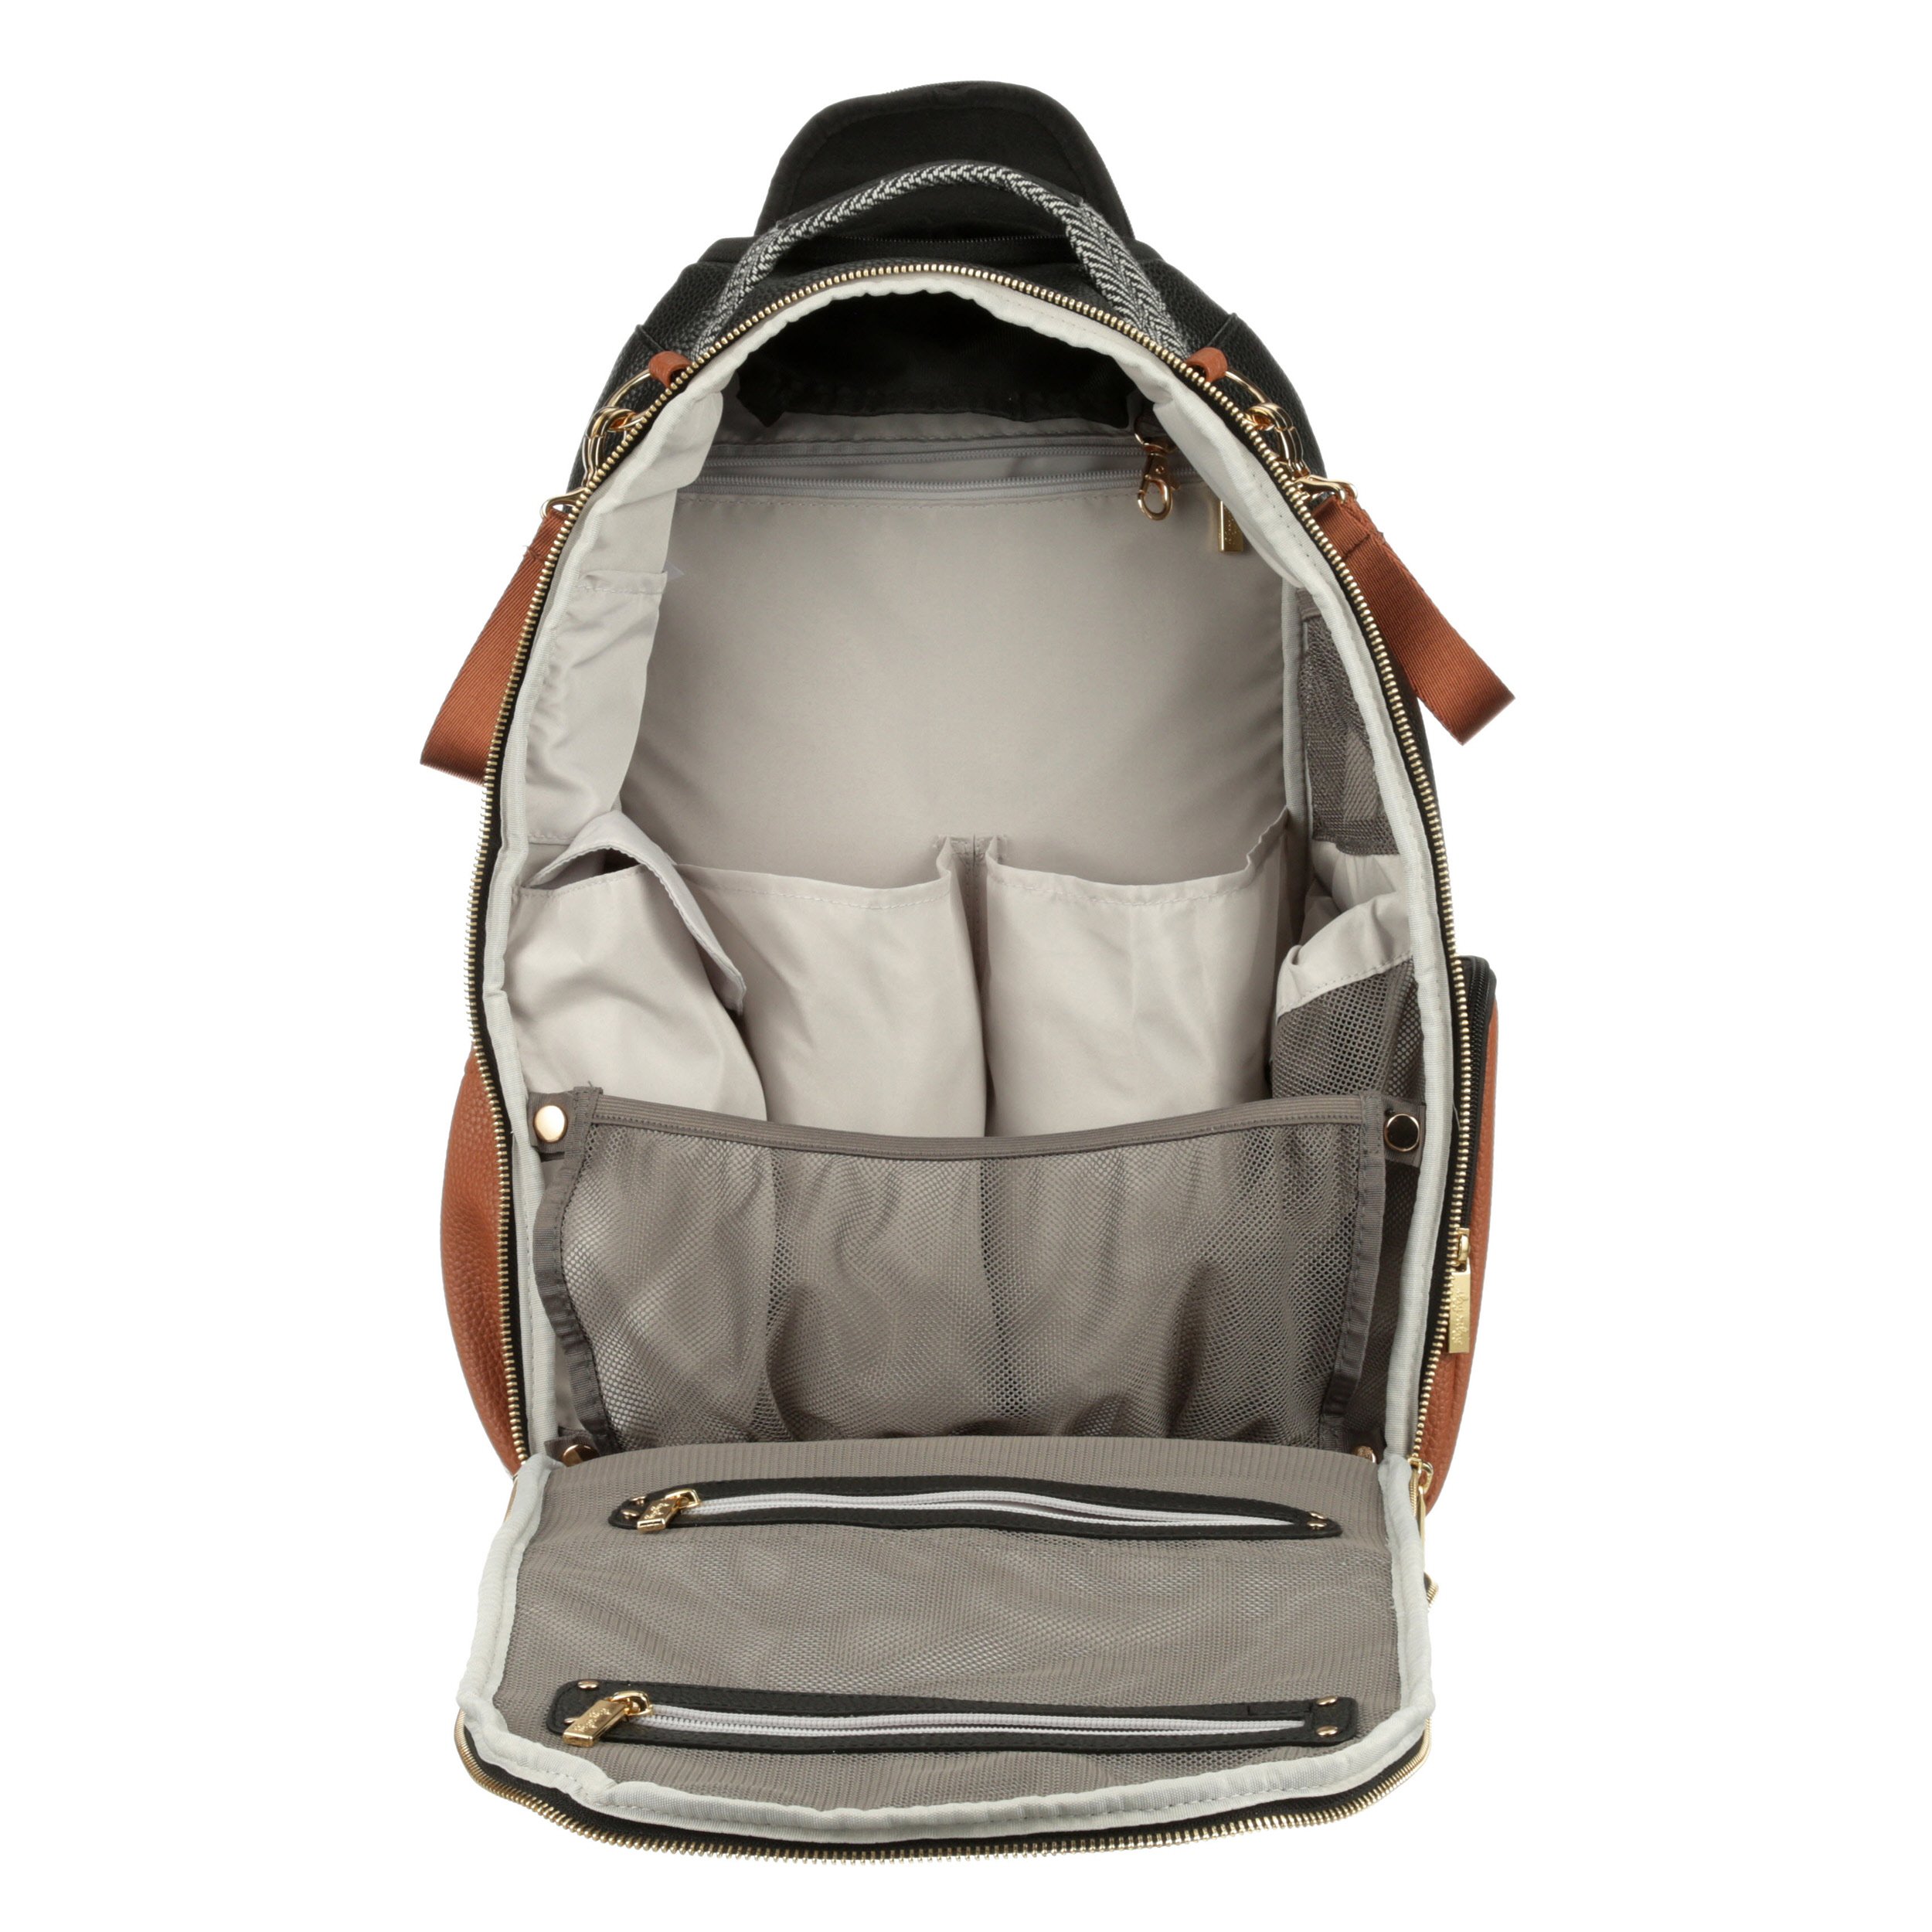 Itzy Ritzy Diaper Bag - Large Capacity Boss Backpack Diaper Bag Featuring Bottle Pockets, Changing Pad, Stroller Clips & Comfortable Straps, Coffee And Cream